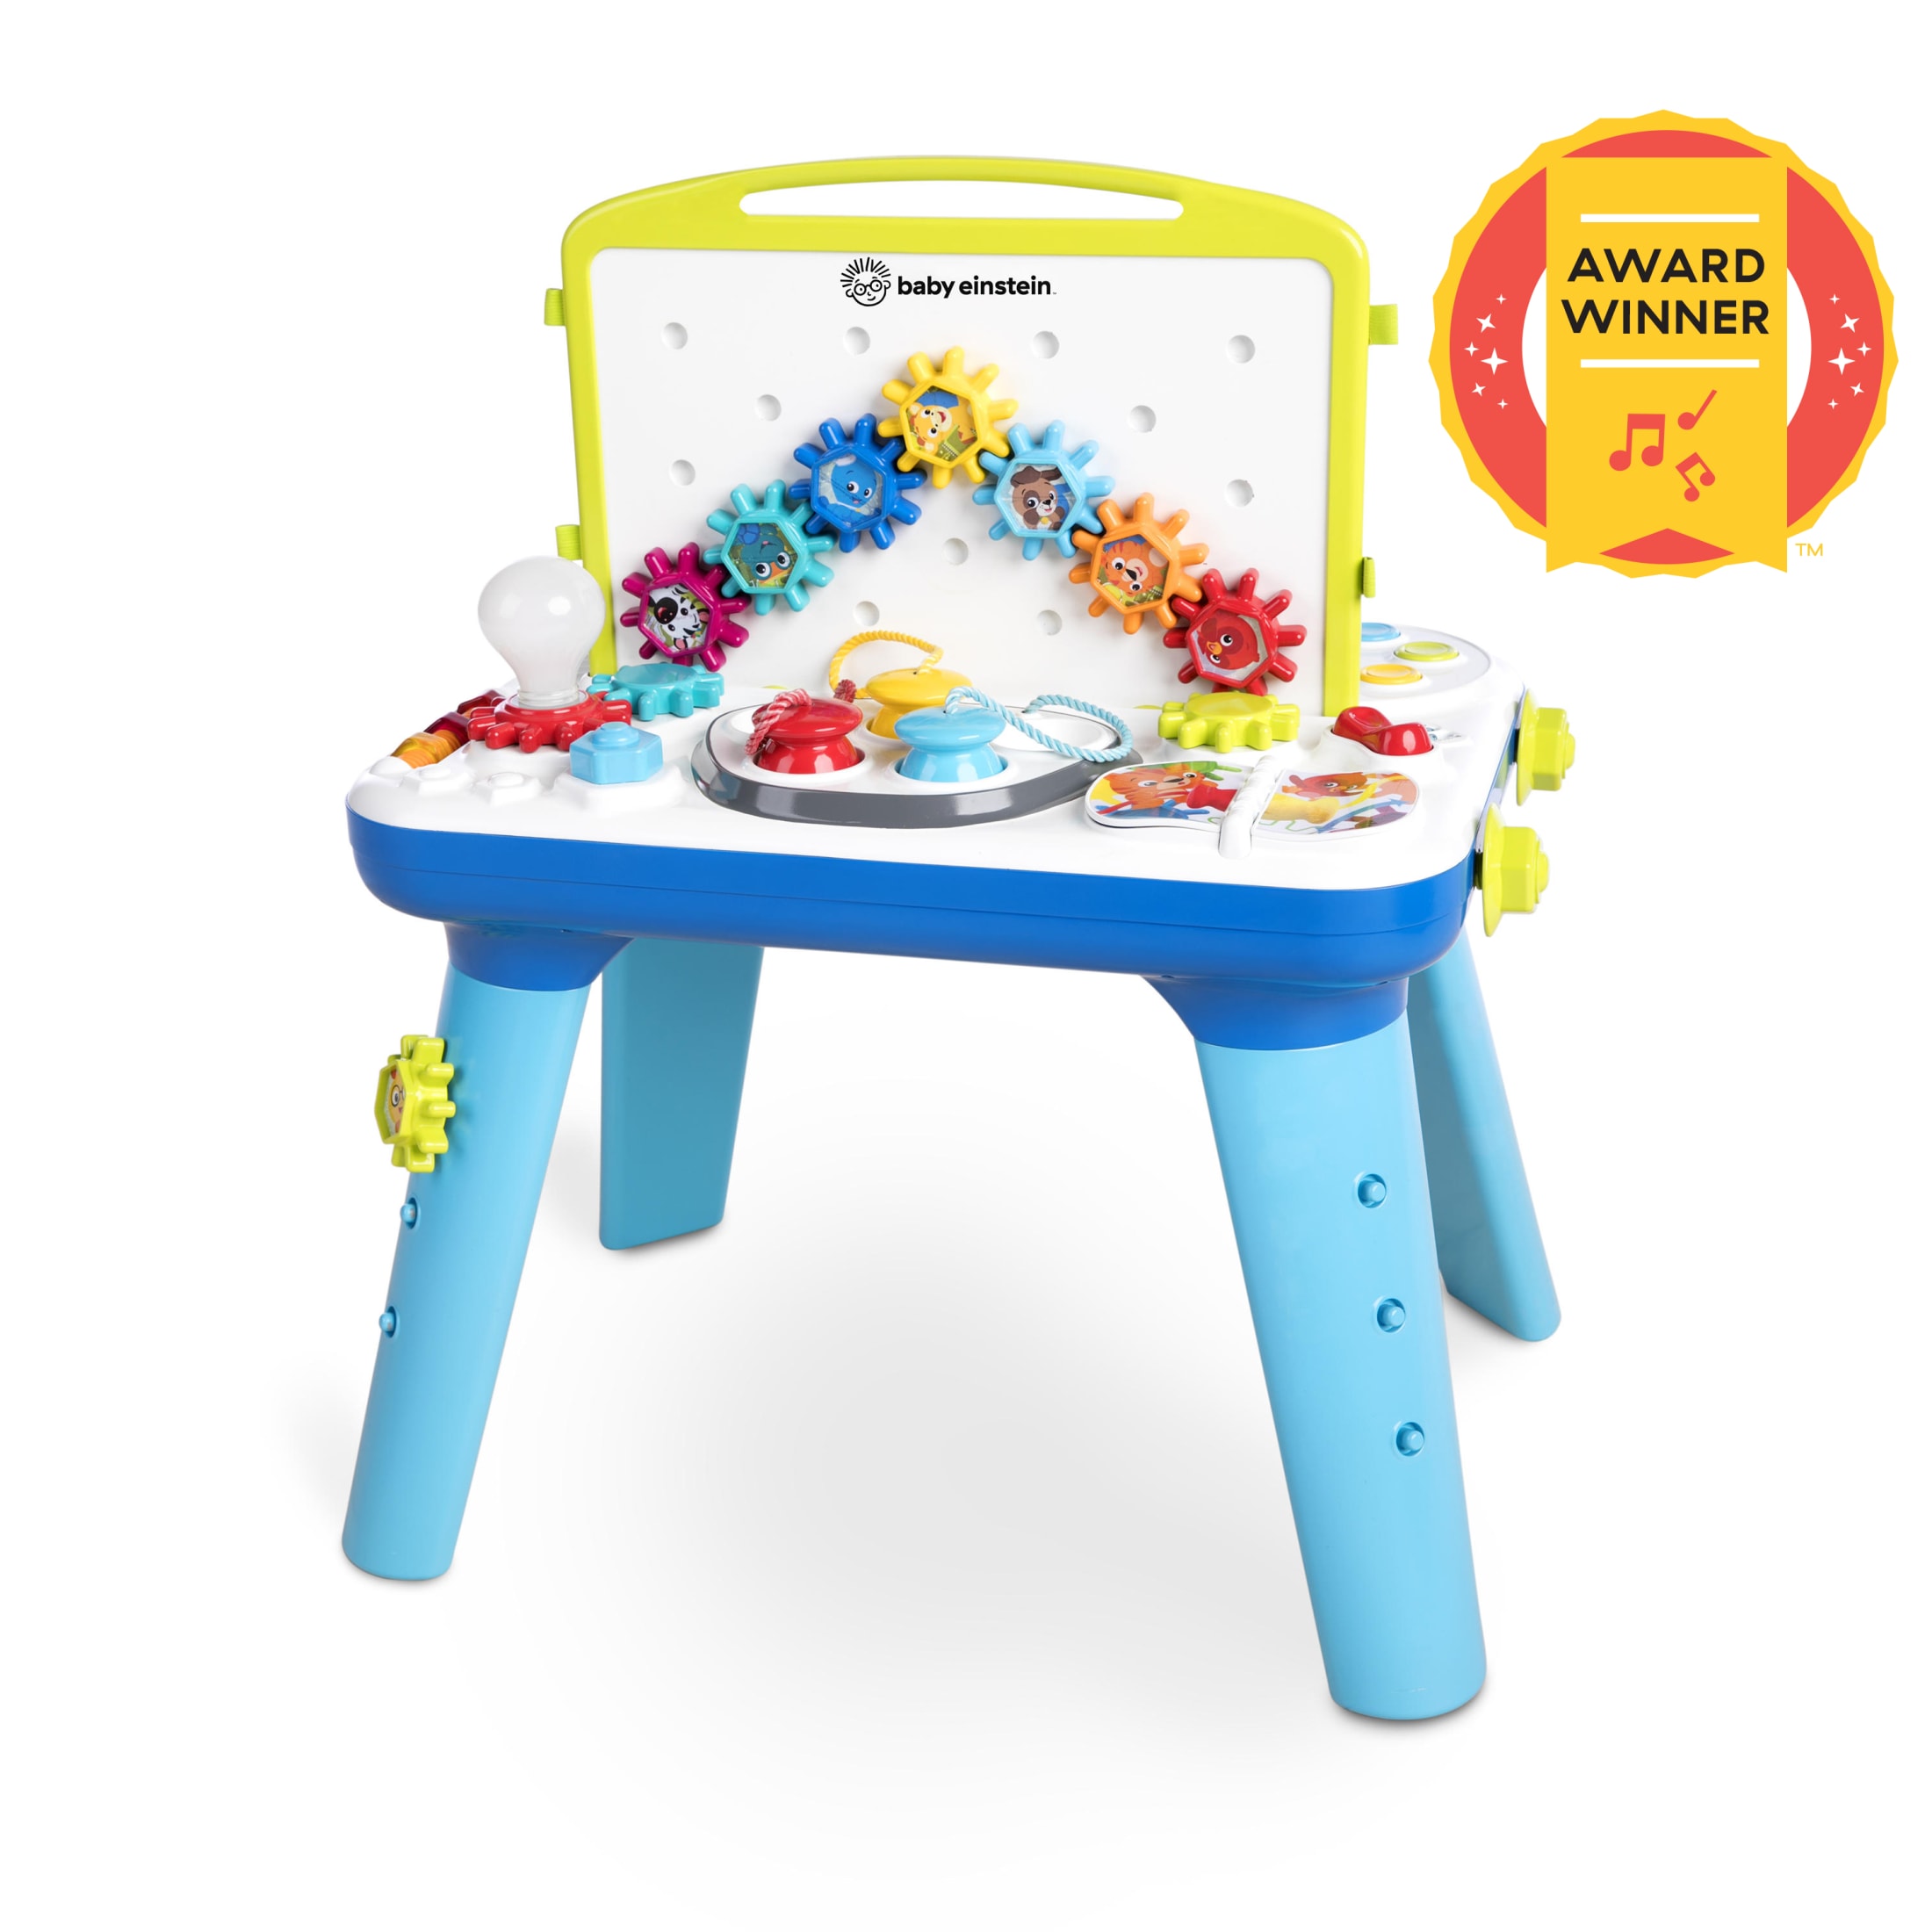 Baby Einstein Removable Curiosity Table Unisex Toddler Activity Center - image 1 of 12